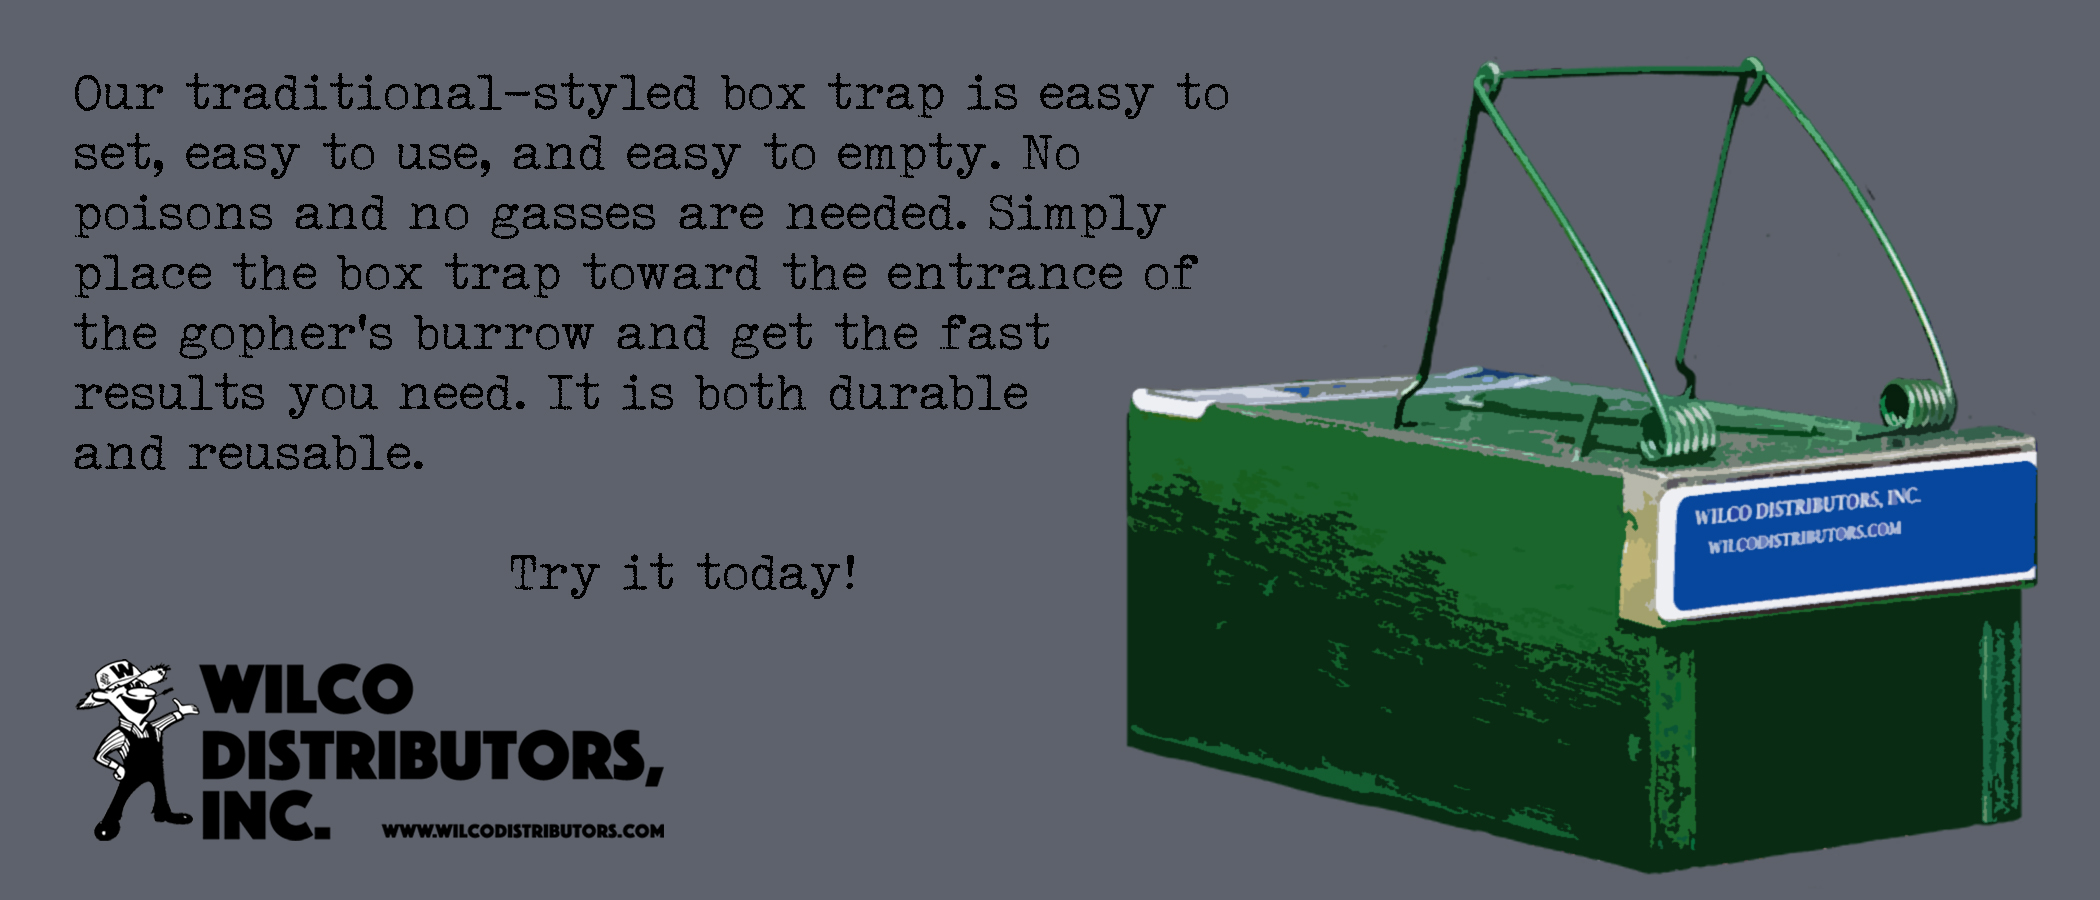 Try this trap, today!